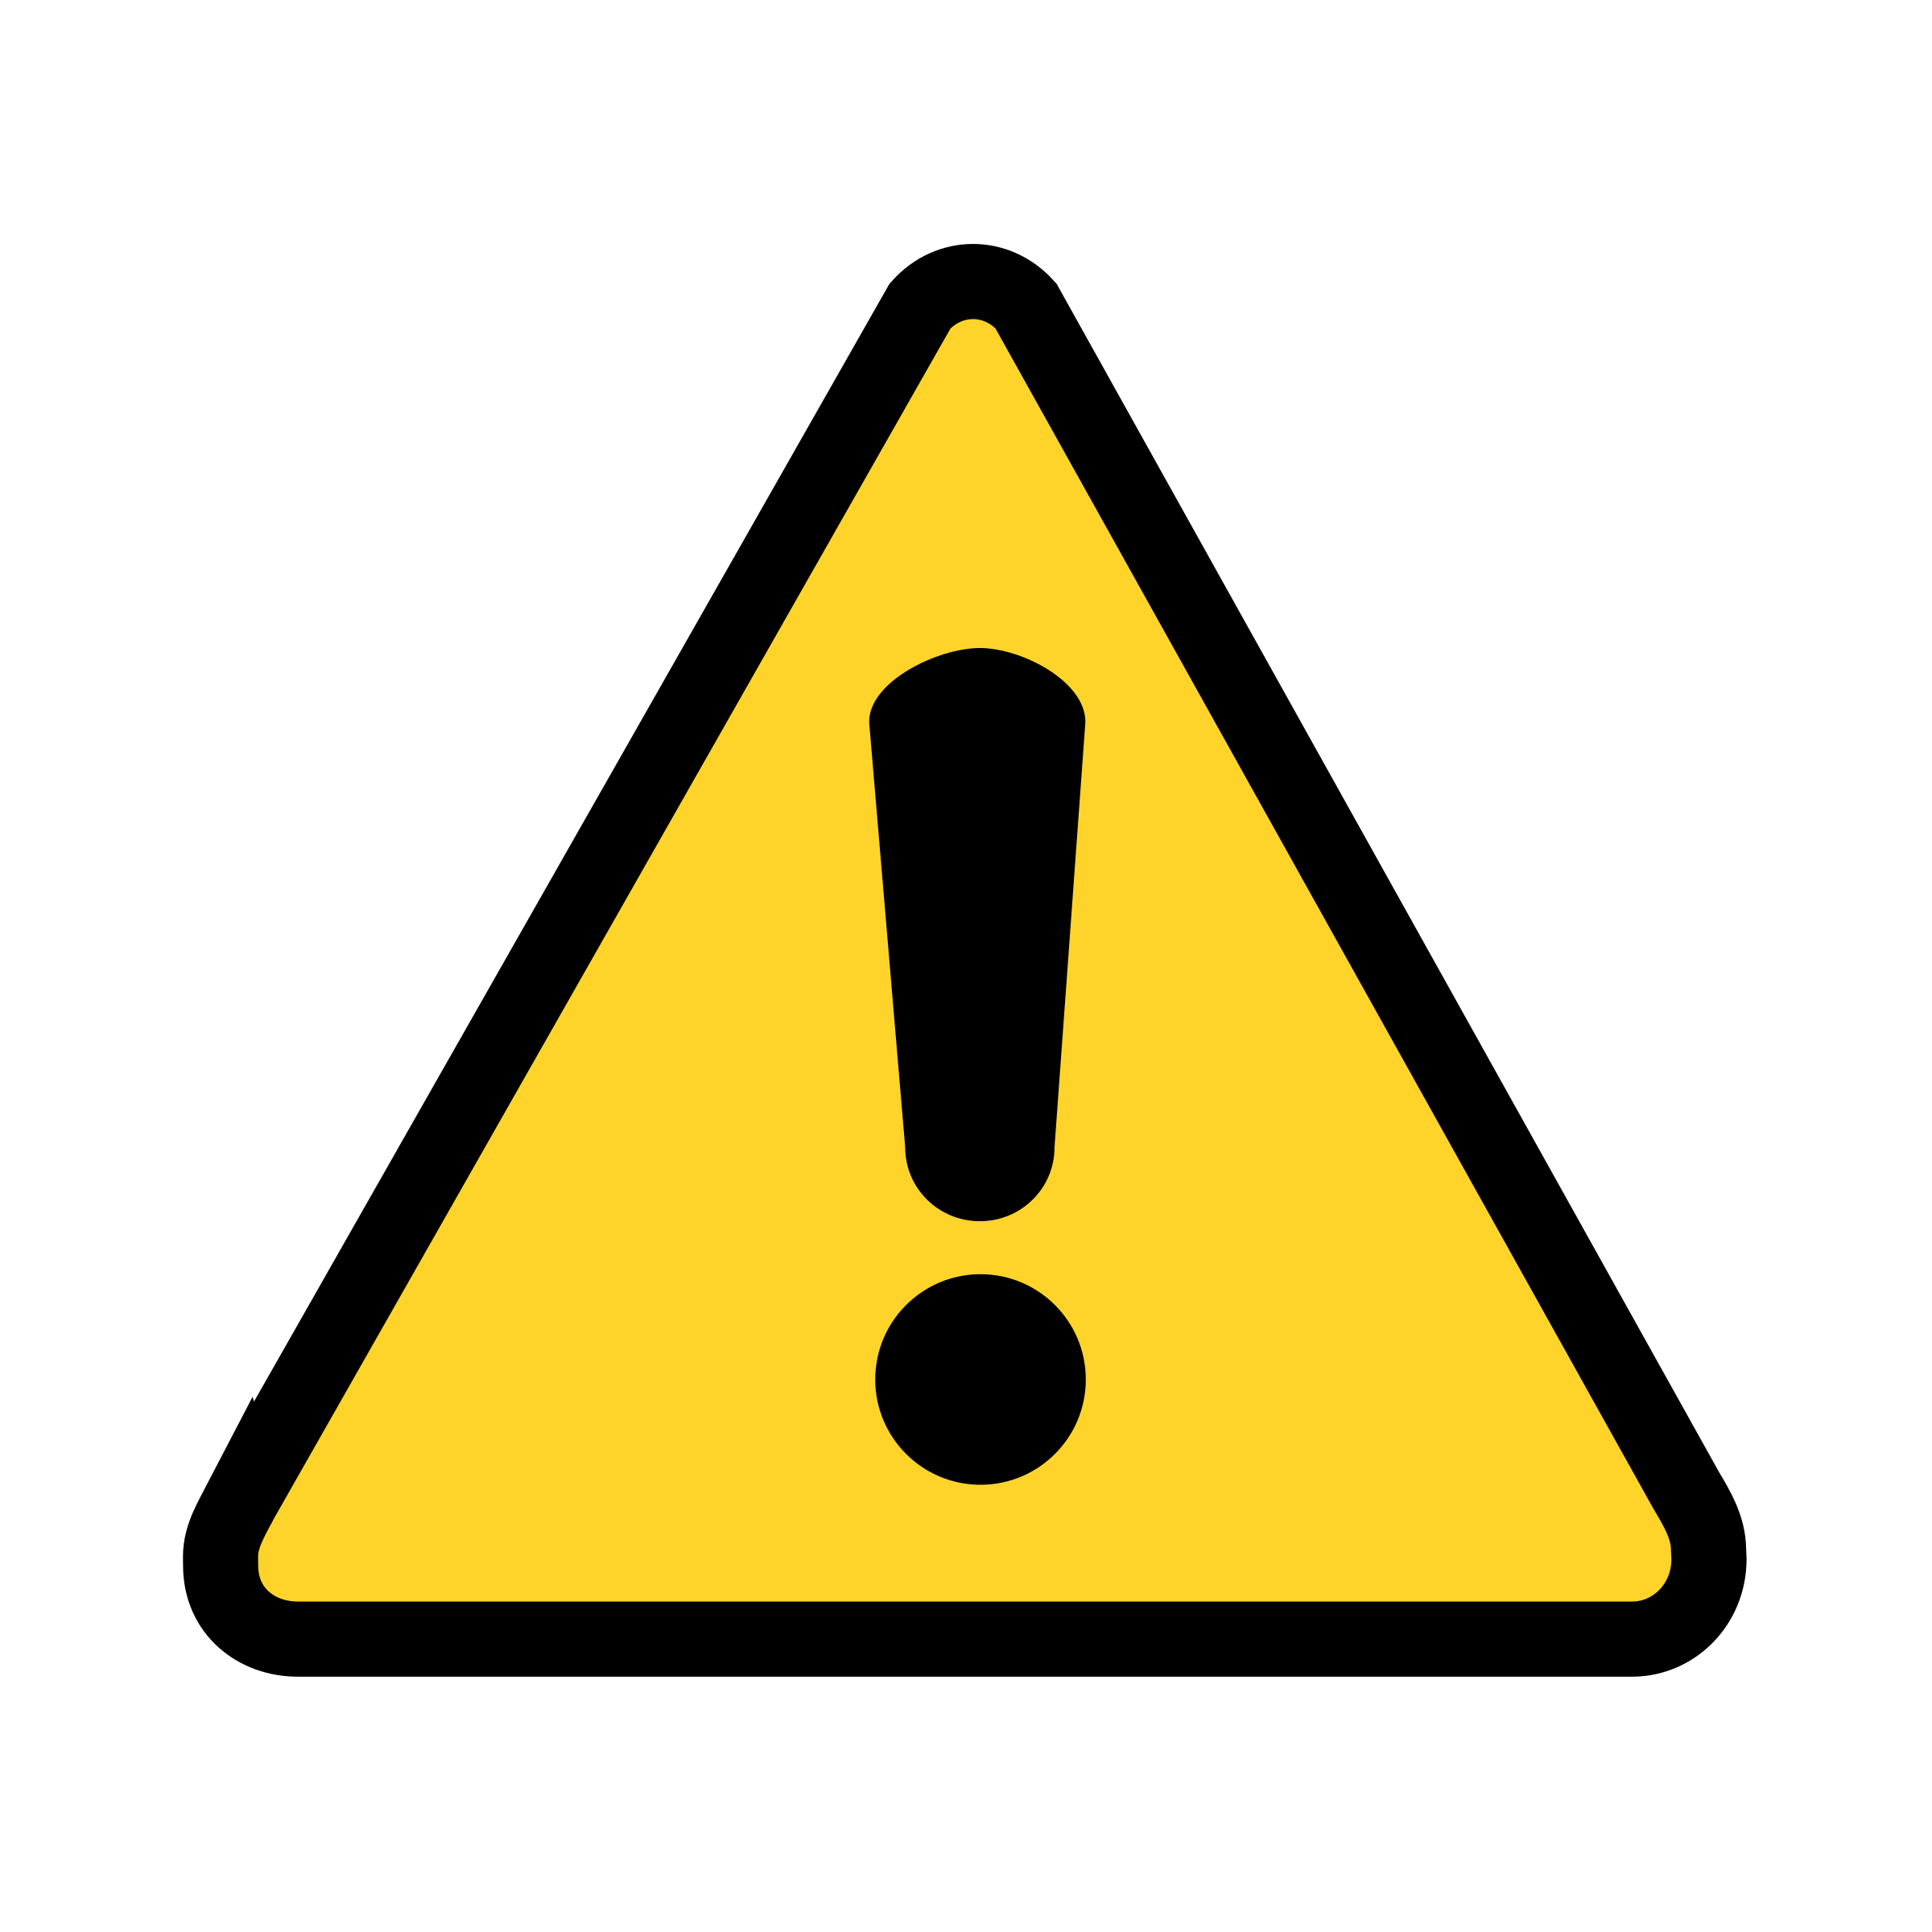 Warning Icon, attention, caution #2765 - Free Icons and PNG ...